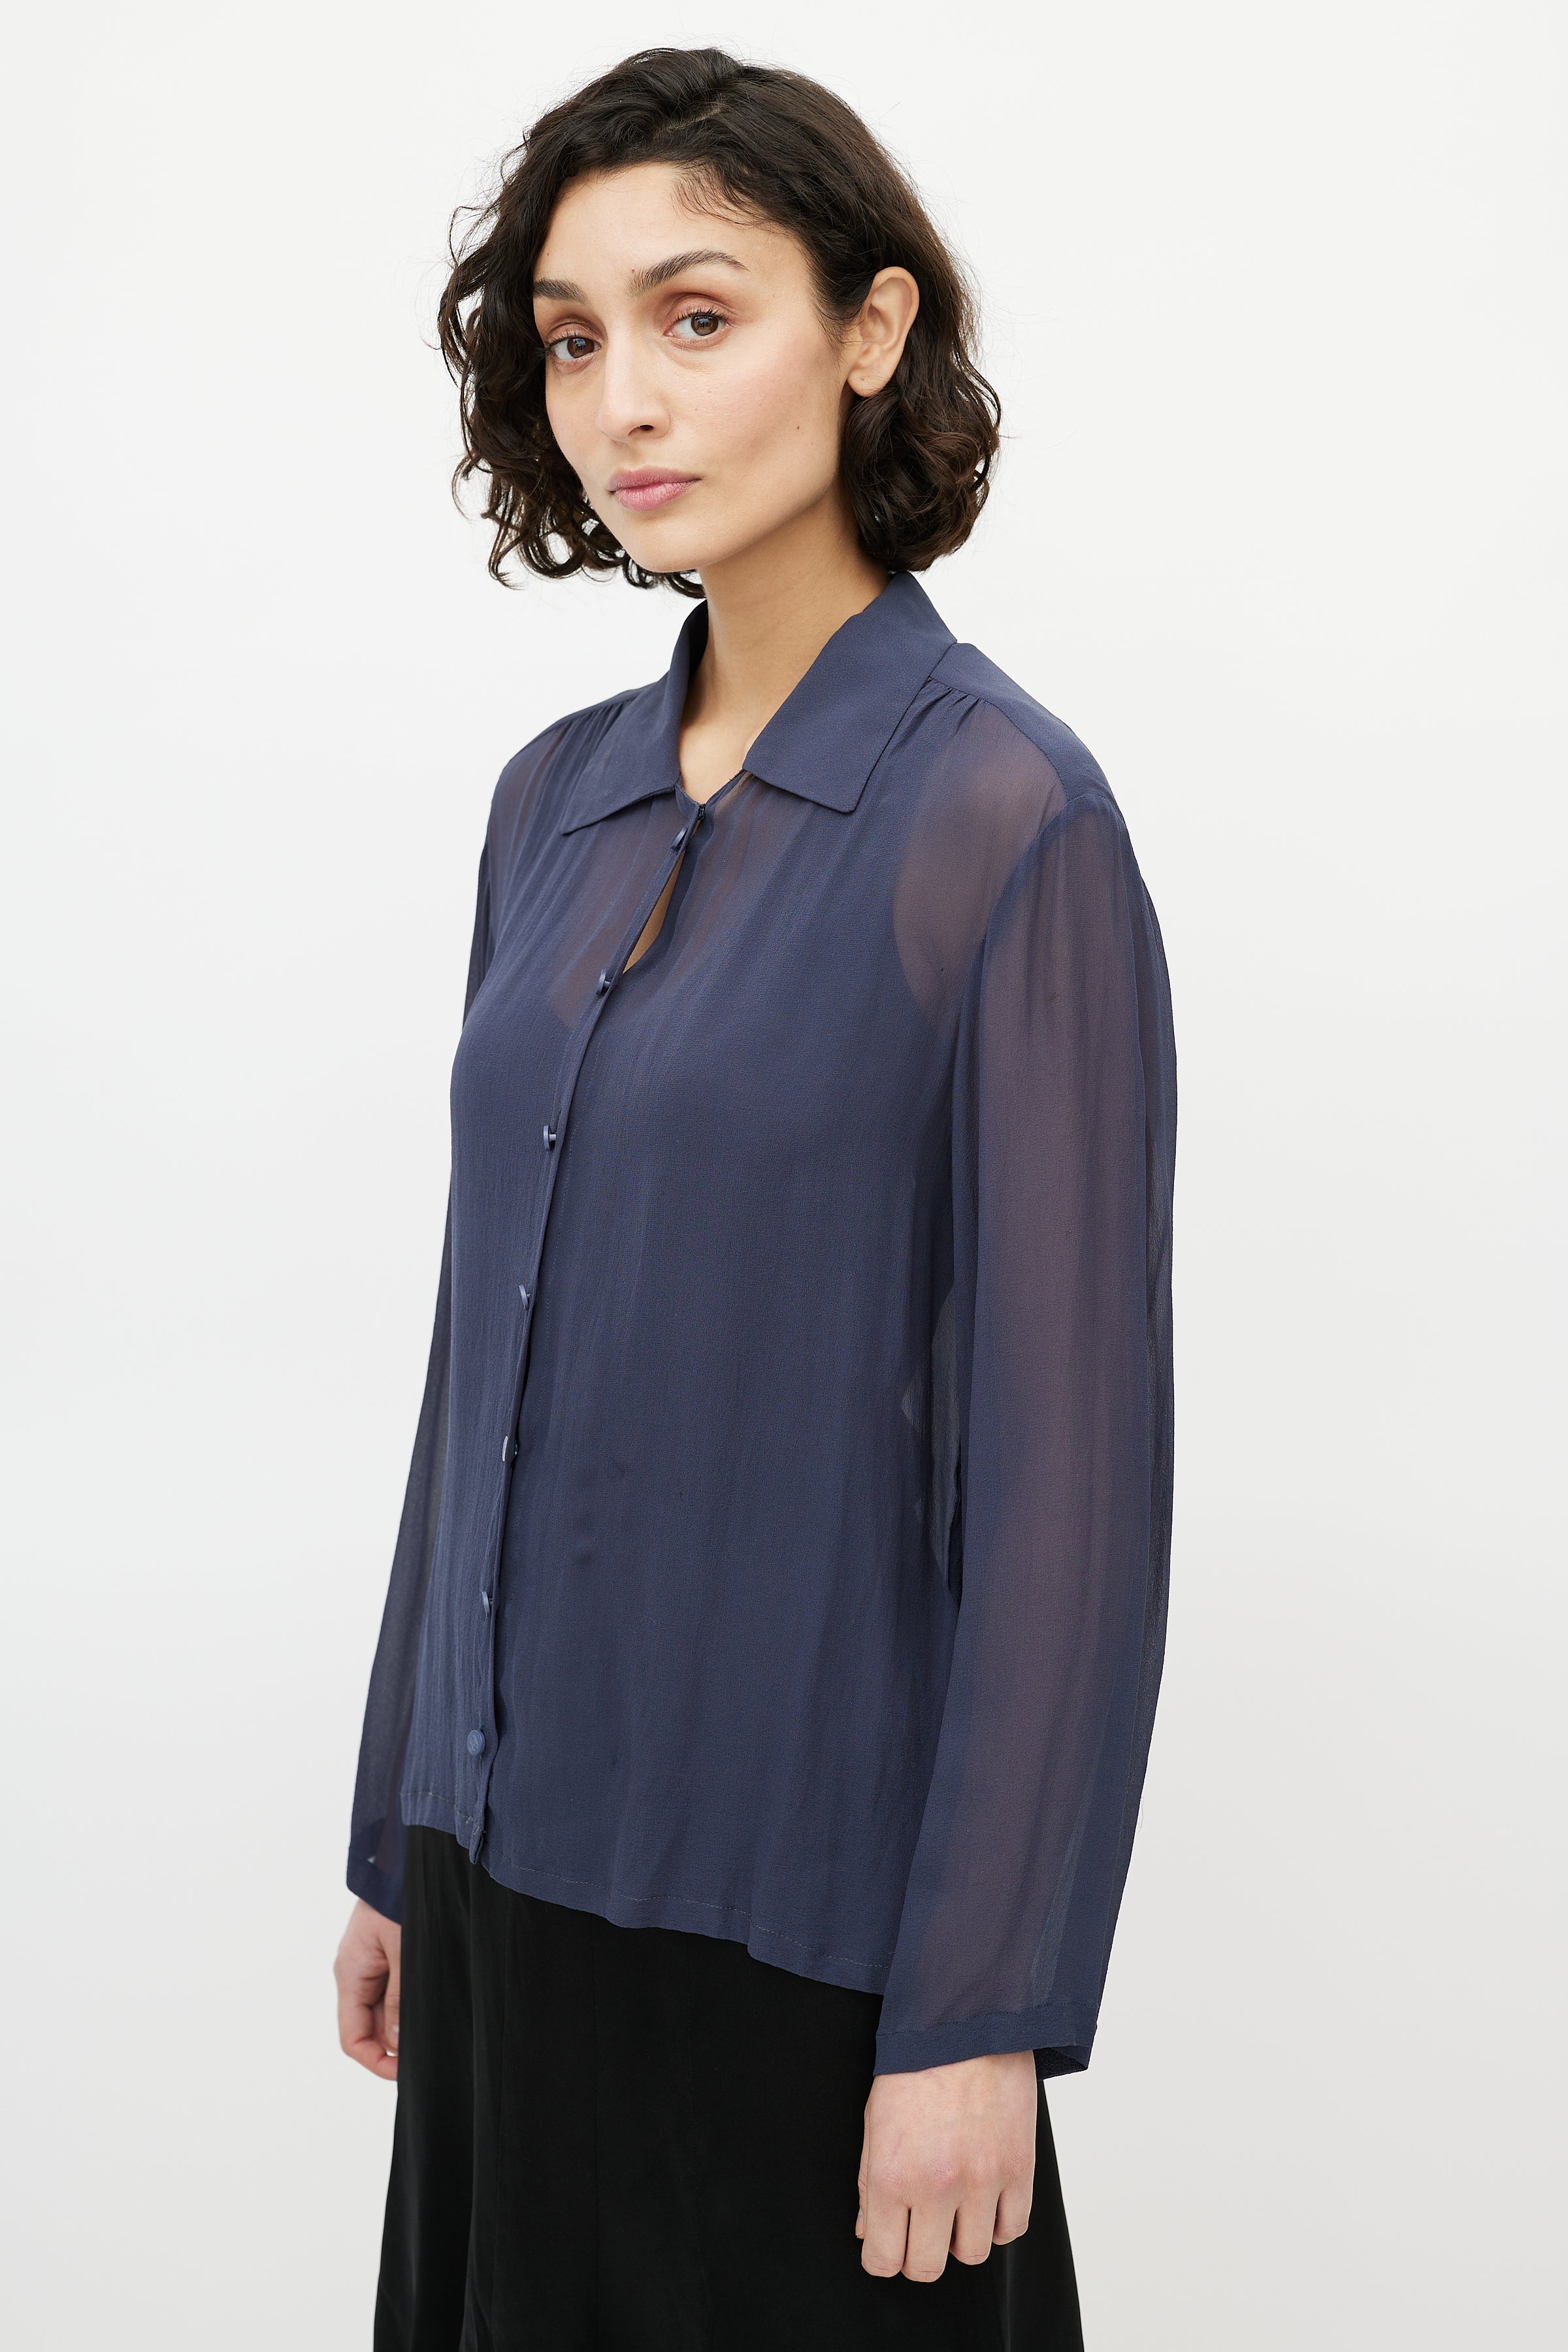 VSP Sheer Navy Scarf Blouse – // Chanel Consignment